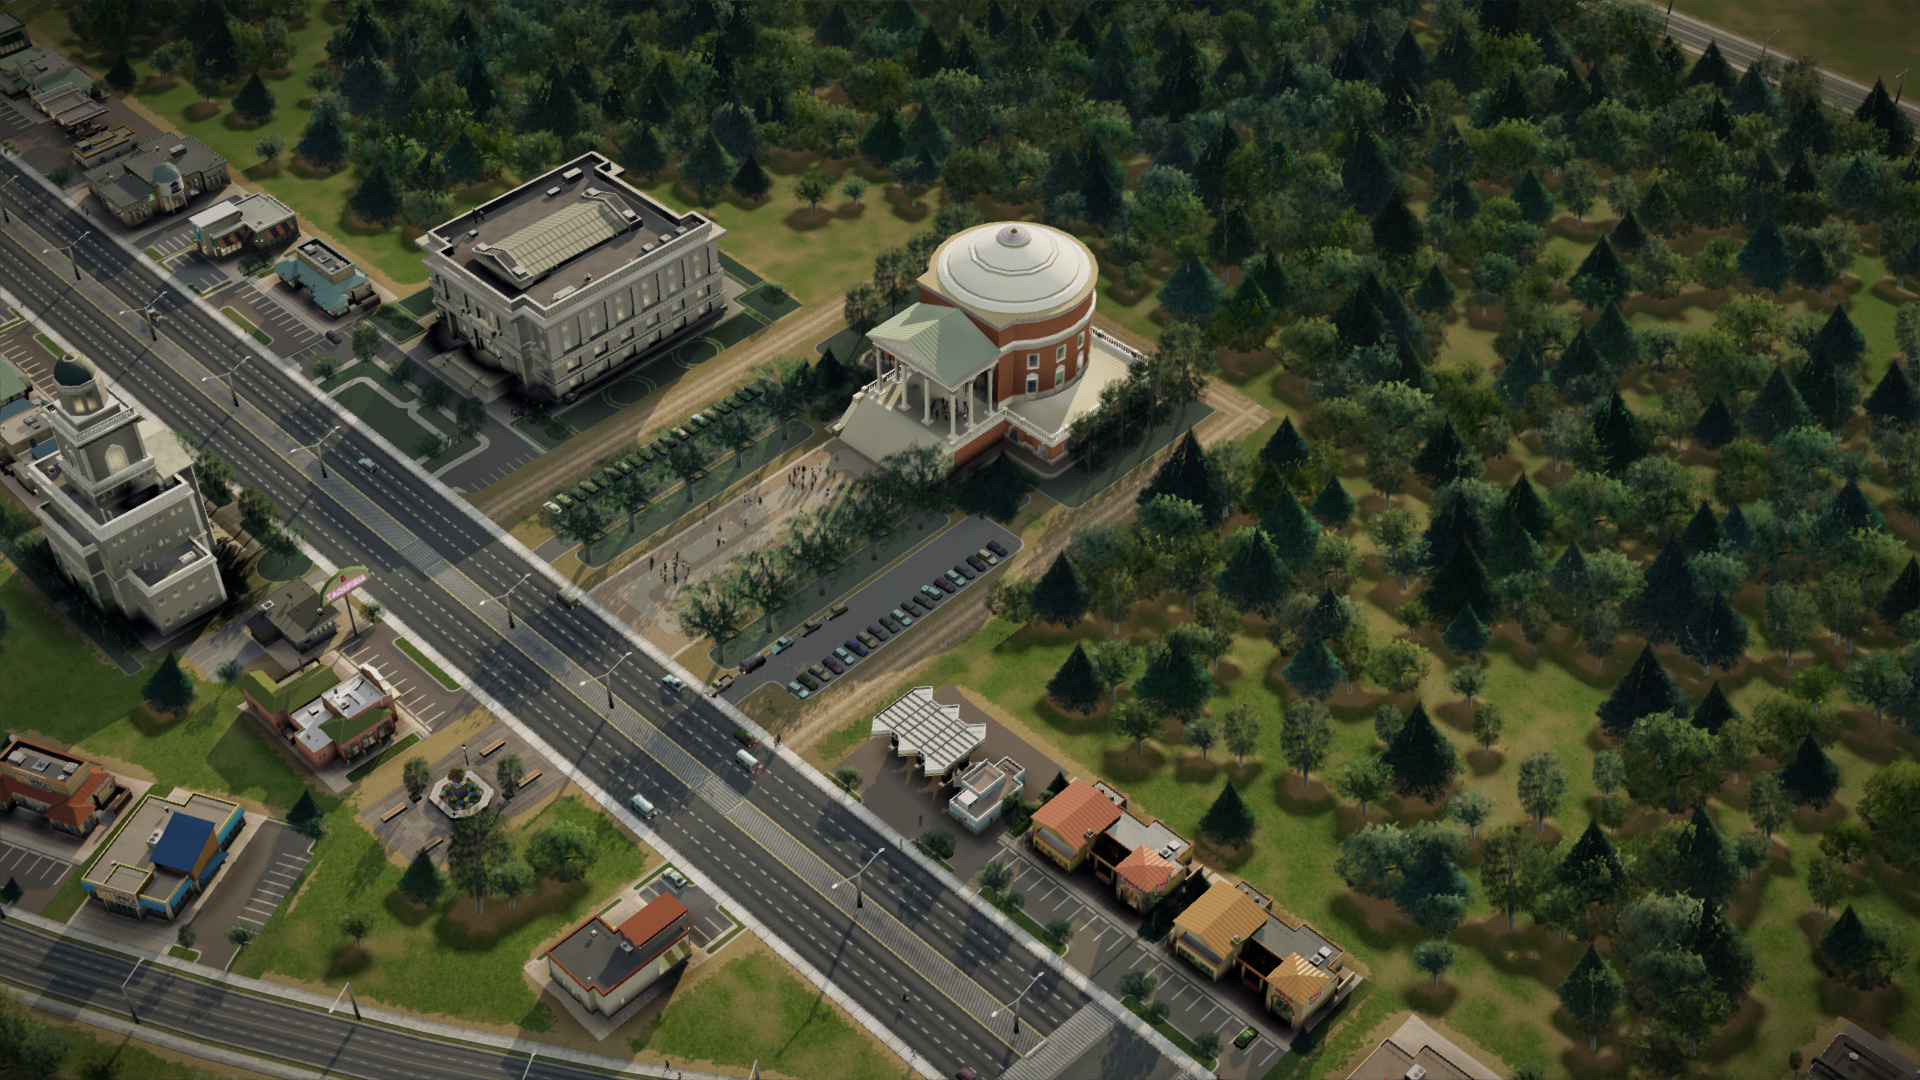 Simcity: it's like to play the 16 City Region Woods” – simcitizens